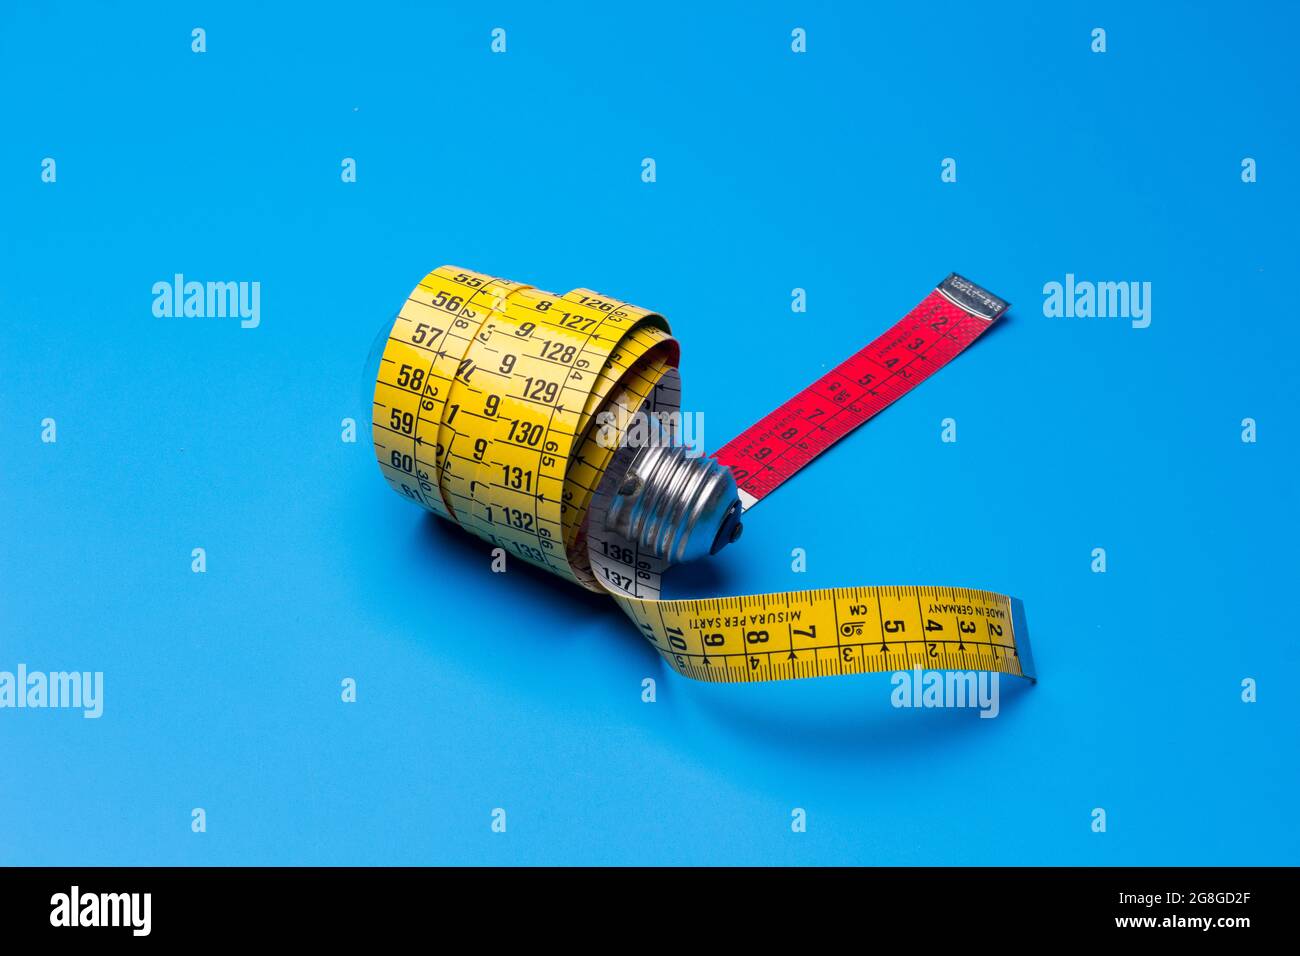 https://c8.alamy.com/comp/2G8GD2F/tailors-and-dressmakers-tape-measure-flexible-yellow-for-measuring-parts-of-the-human-body-to-create-suits-and-dresses-2G8GD2F.jpg